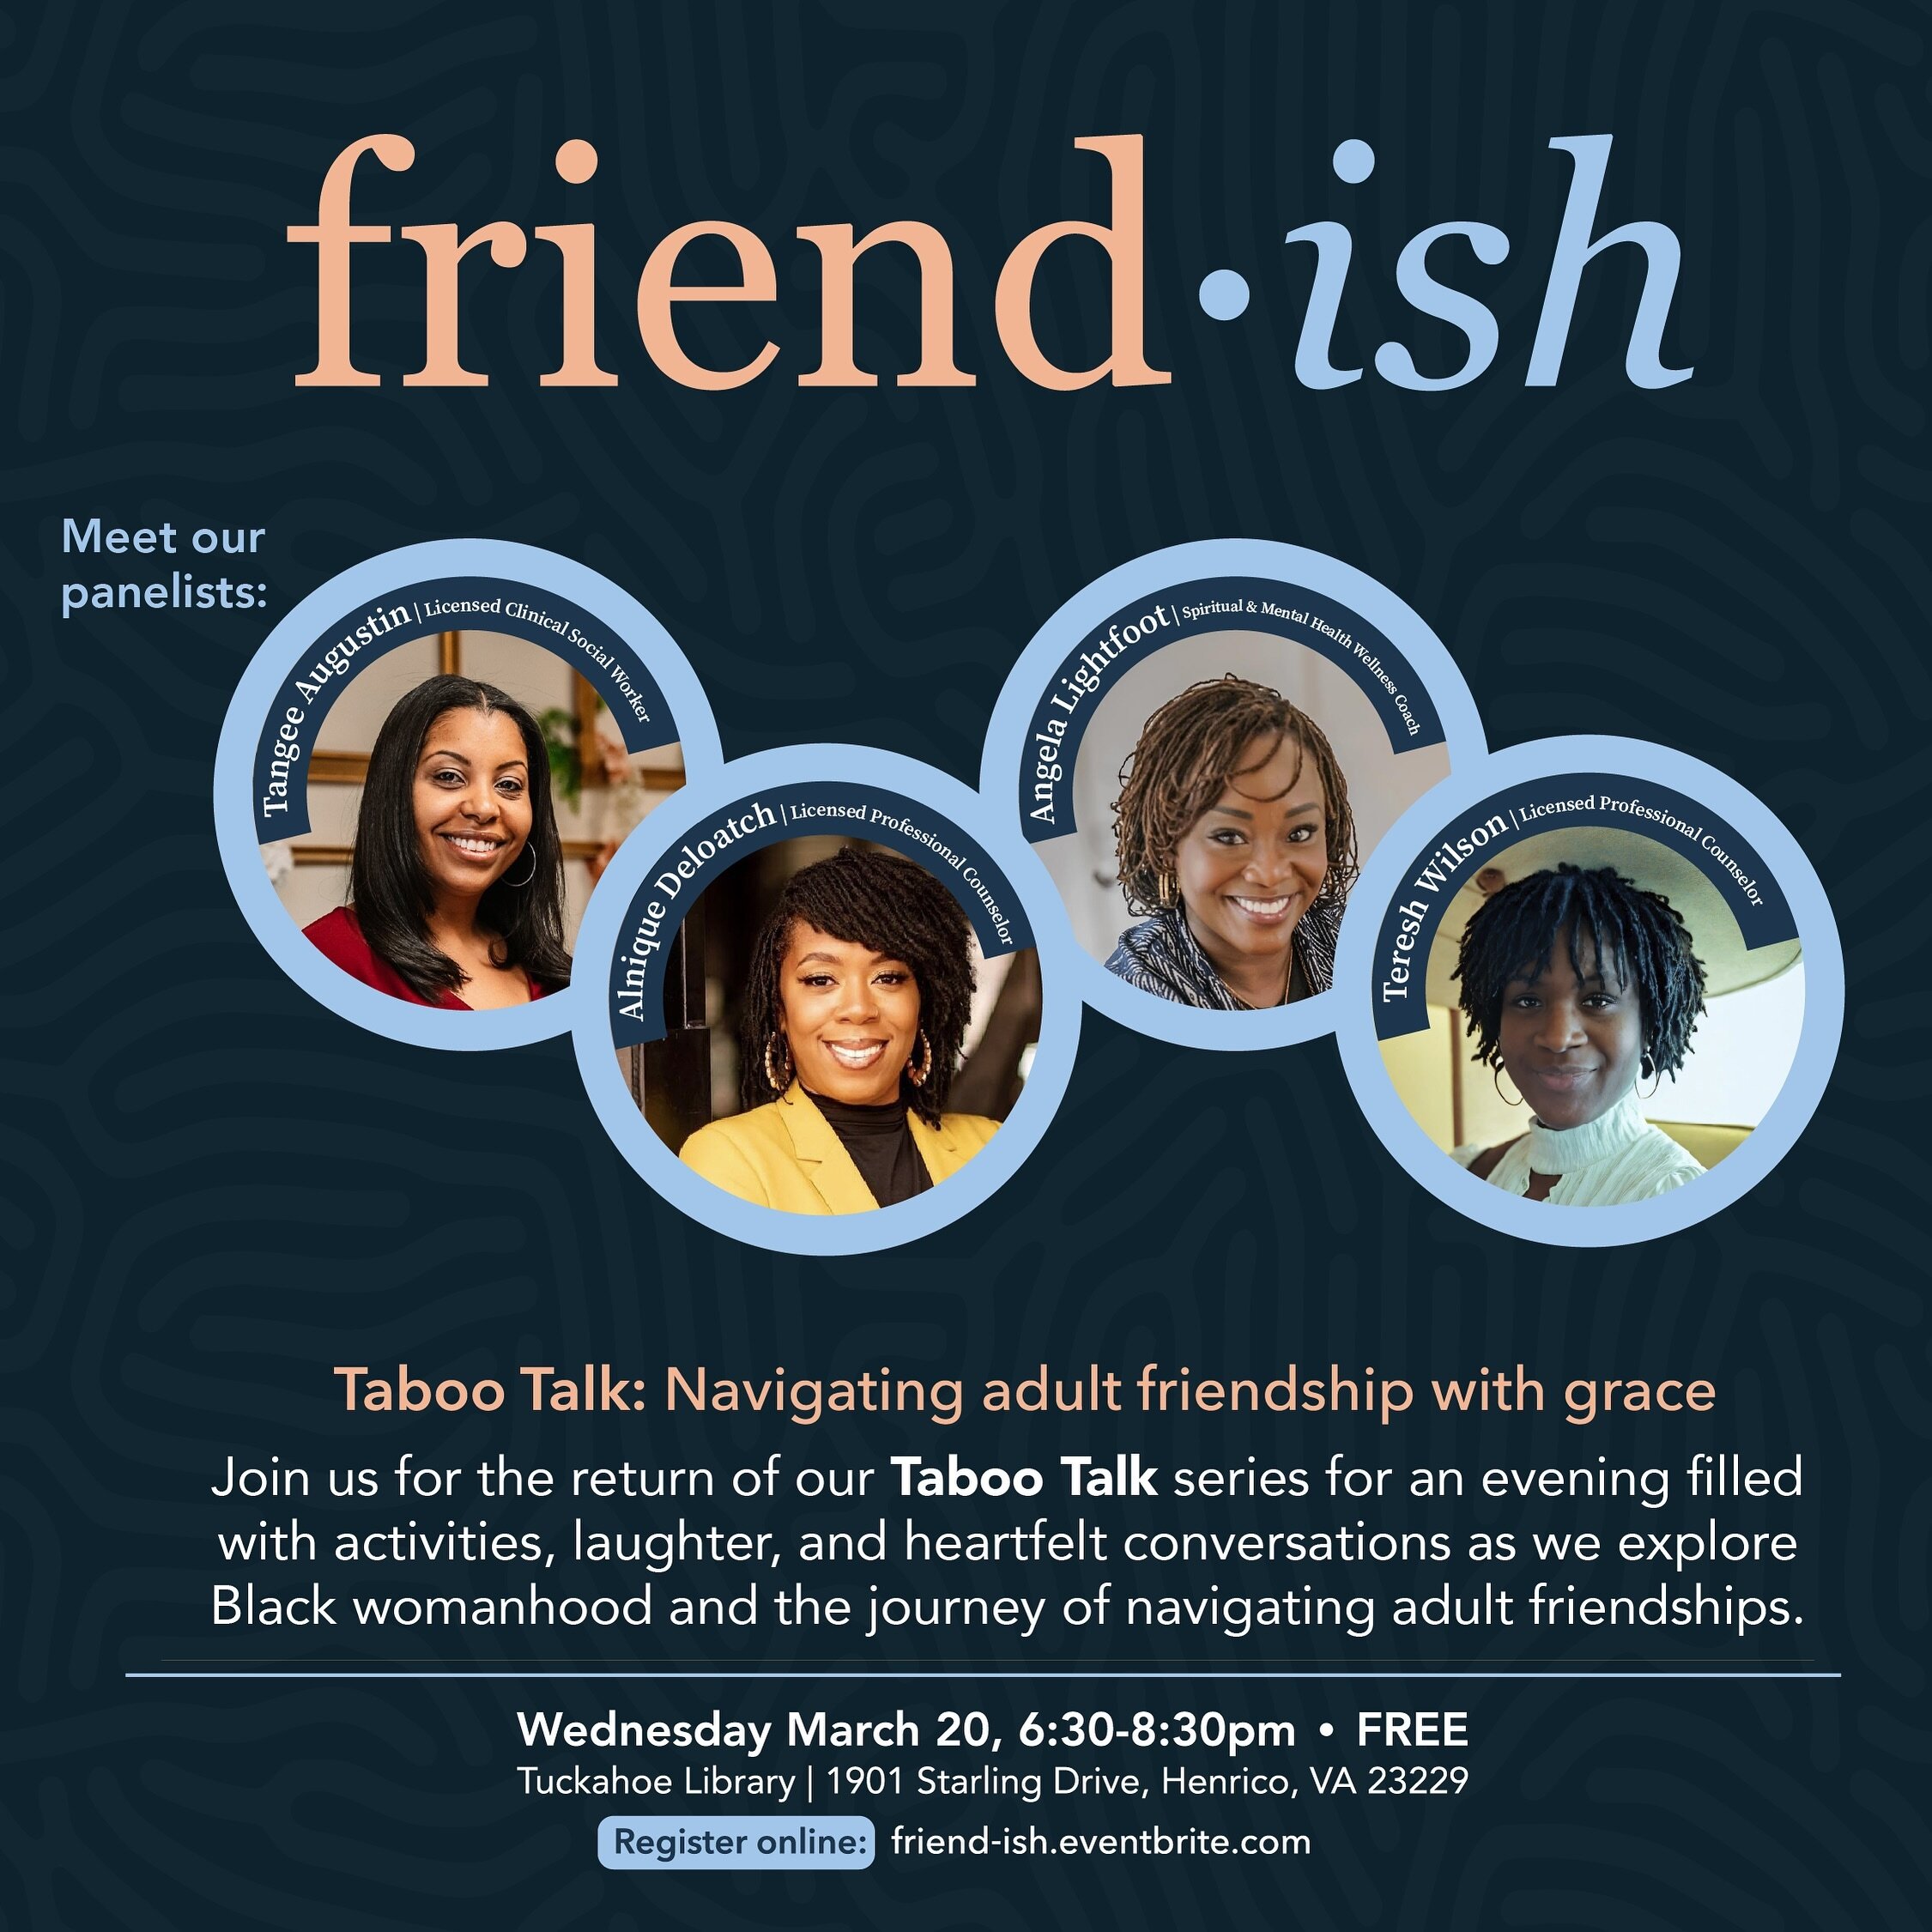 JOIN US TONIGHT!

Have you gotten your ticket yet?! Join us for an interactive discussion + panel on our next Taboo Talk: Friend&bull;ish. 

We'll participate in a few activities and have meaningful conversations about Black womanhood and how to effe